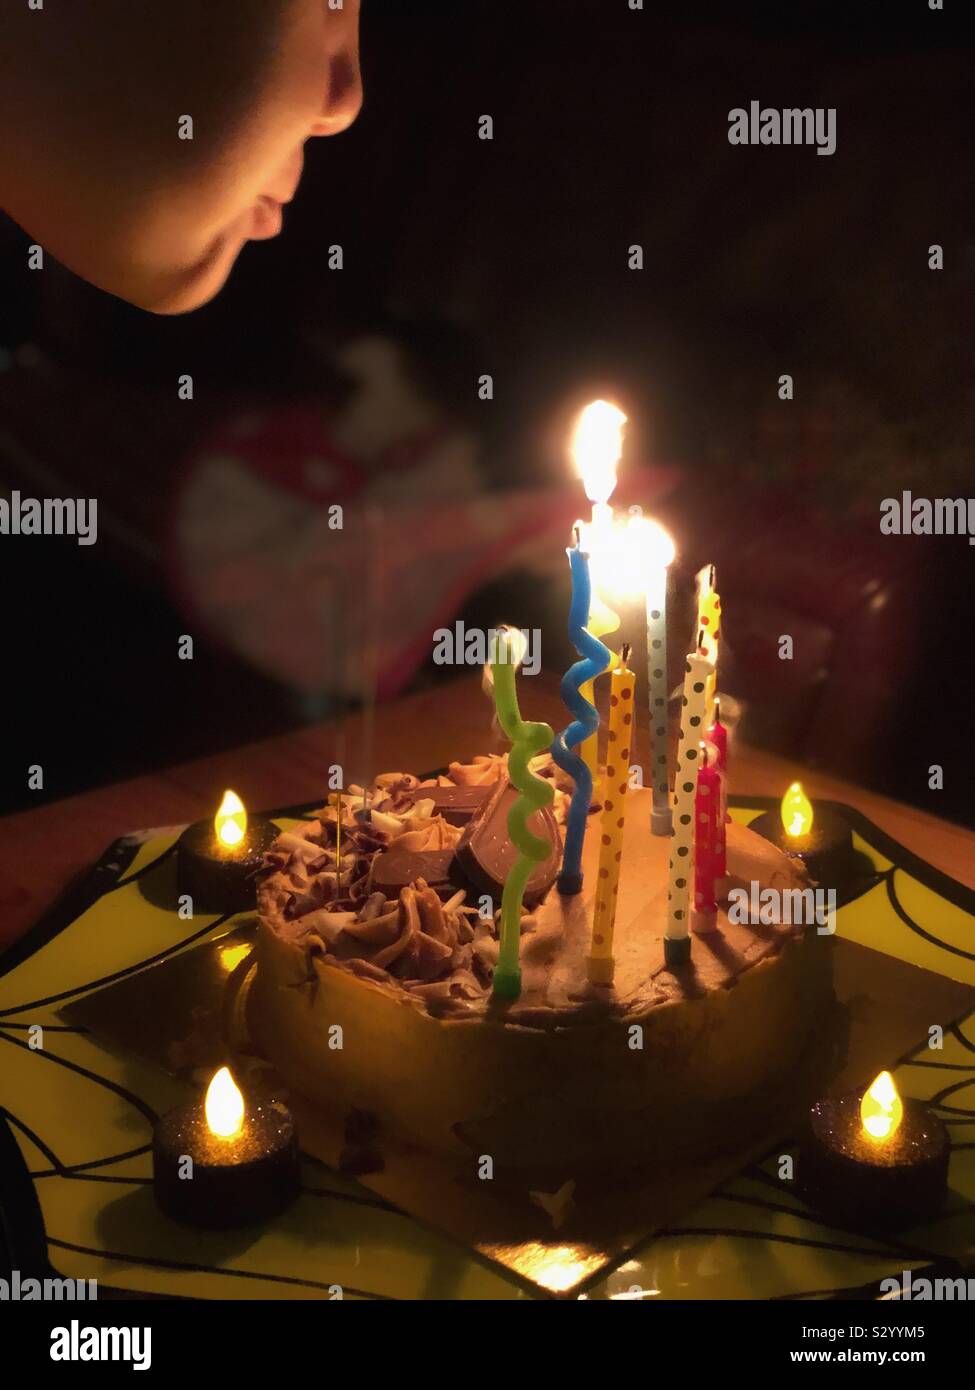 Boy blowing out candles on a birthday cake Stock Photo